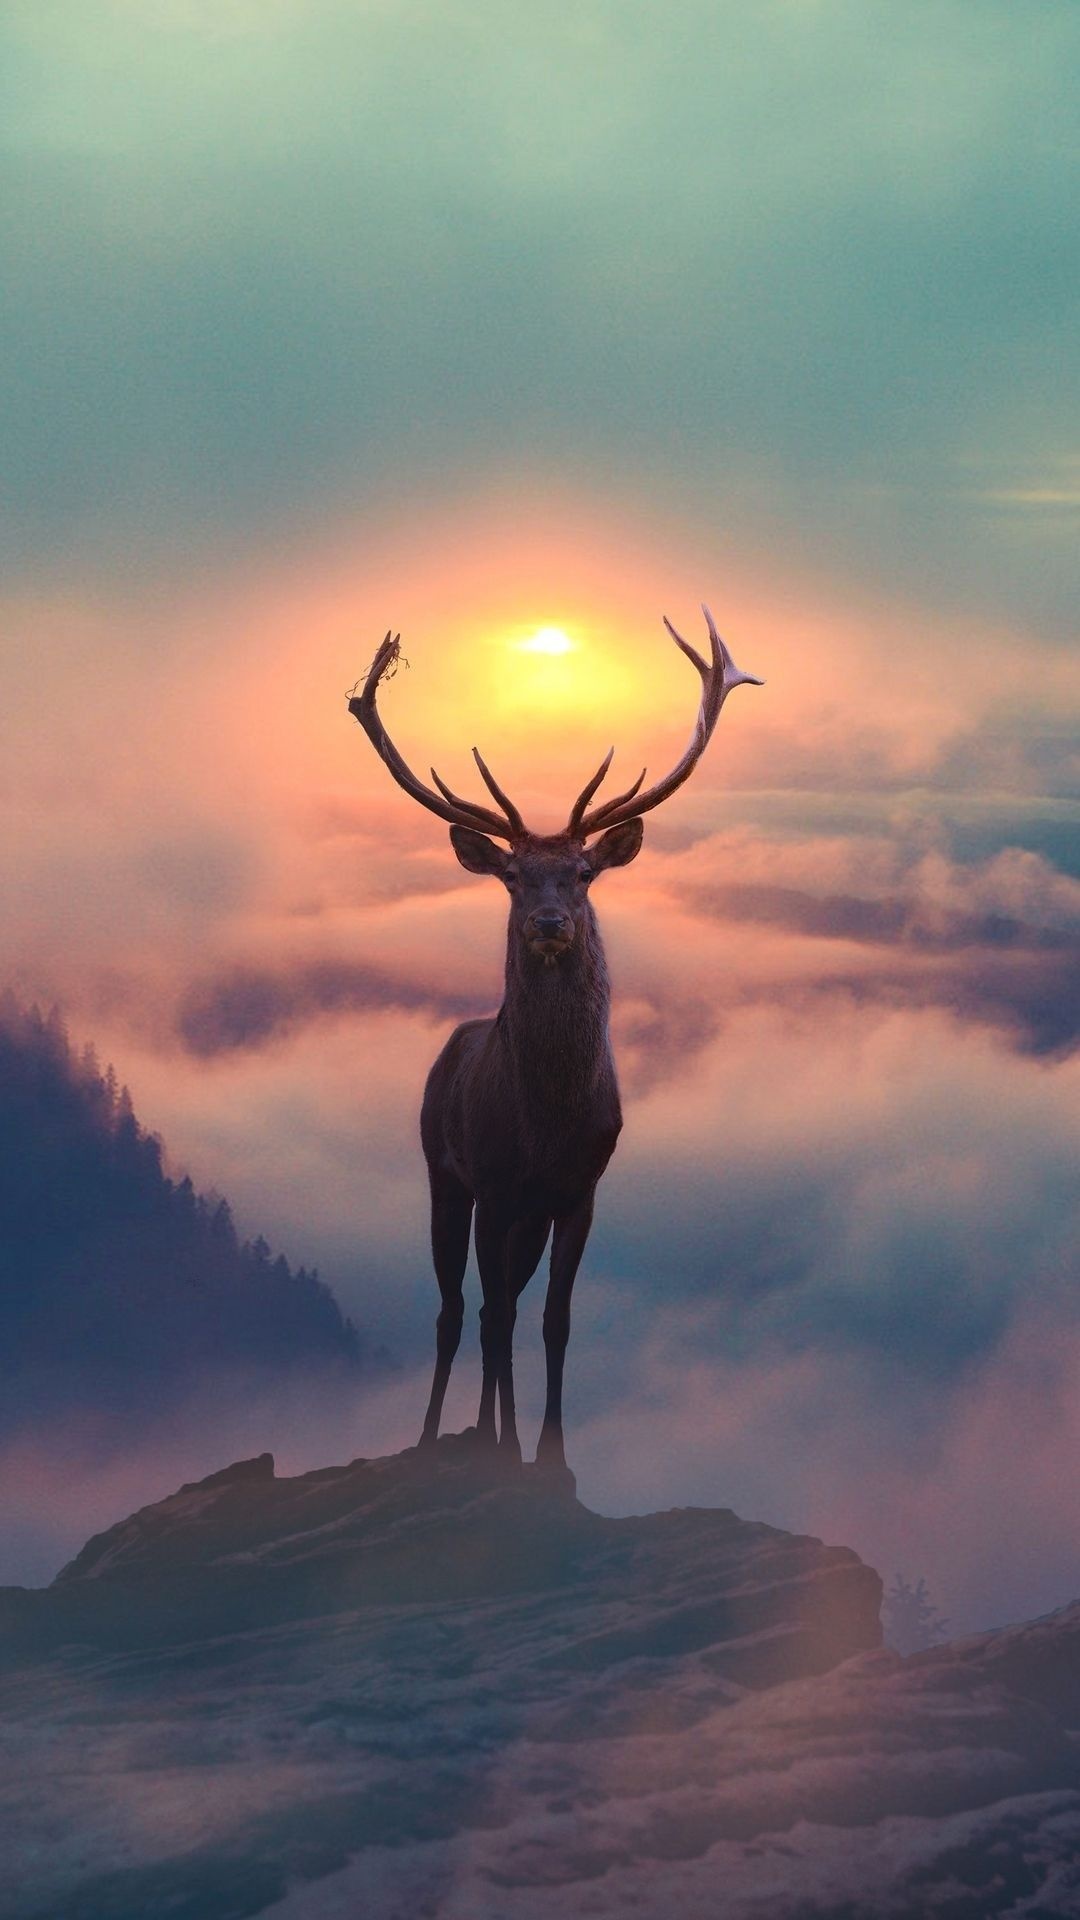 Awesome deer wallpaper, Stunning image, Wildlife's grace, Nature's masterpiece, 1080x1920 Full HD Handy